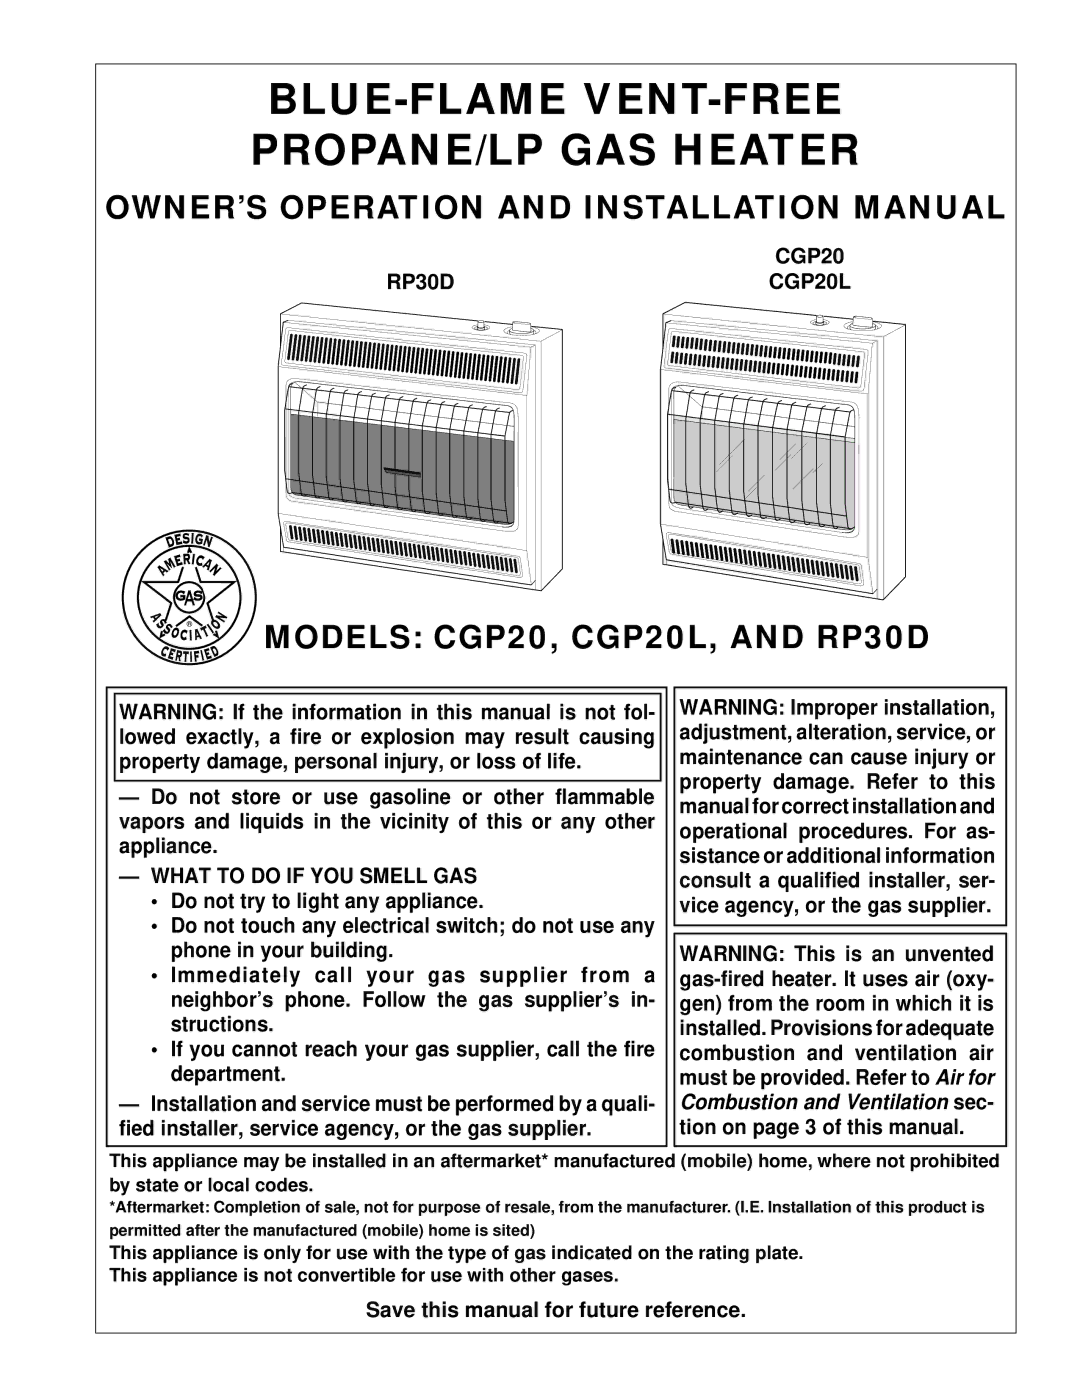 Desa RP30D installation manual What to do if YOU Smell GAS, CGP20L 